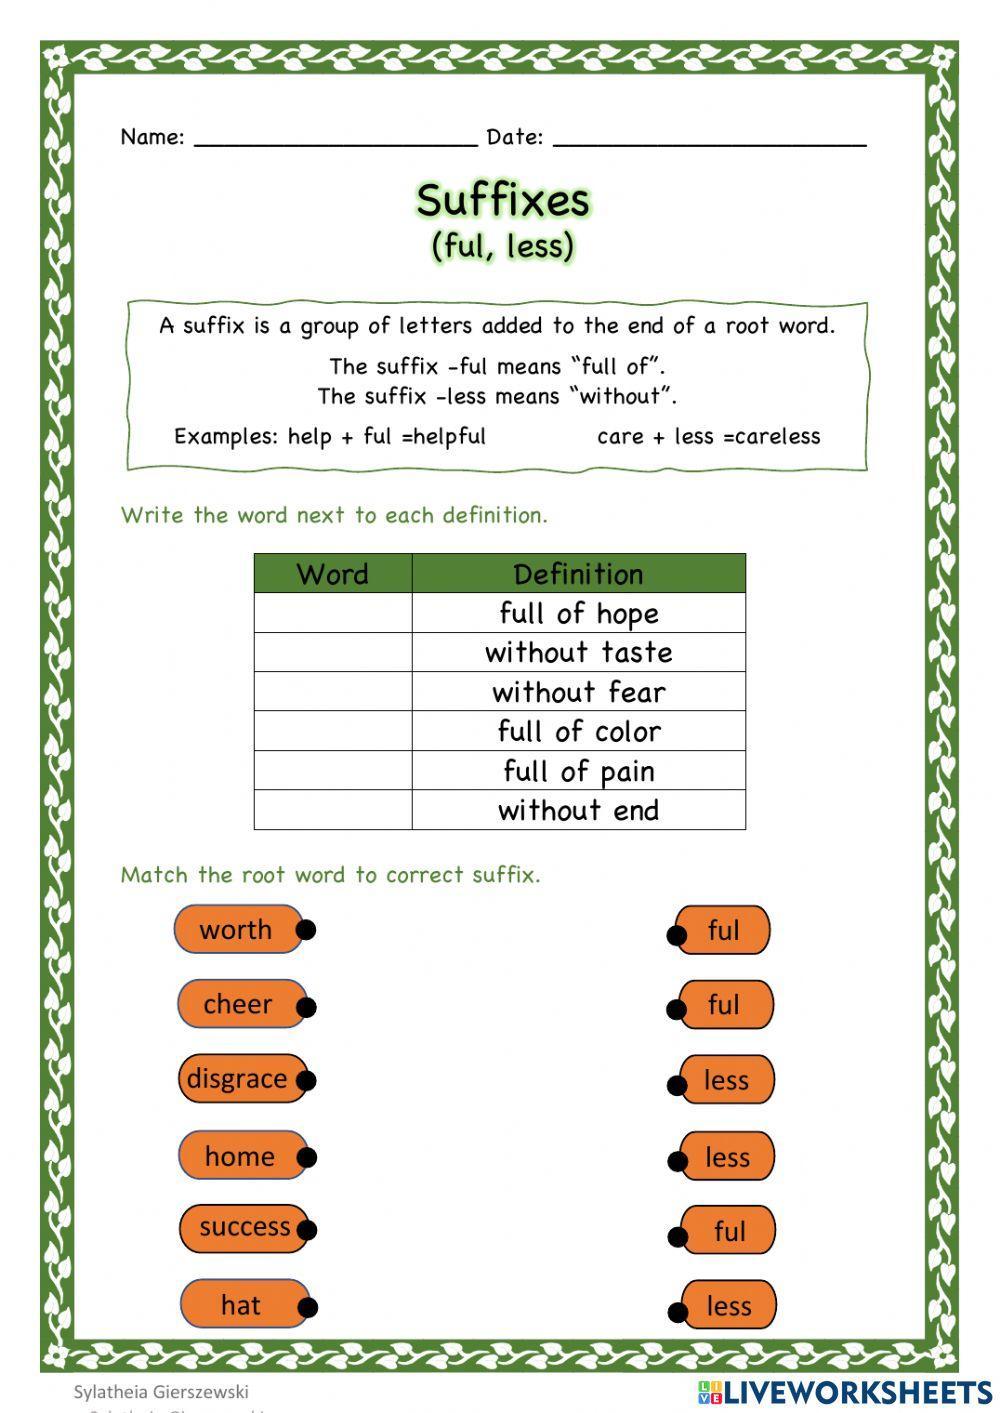 Suffixes (ful, less)